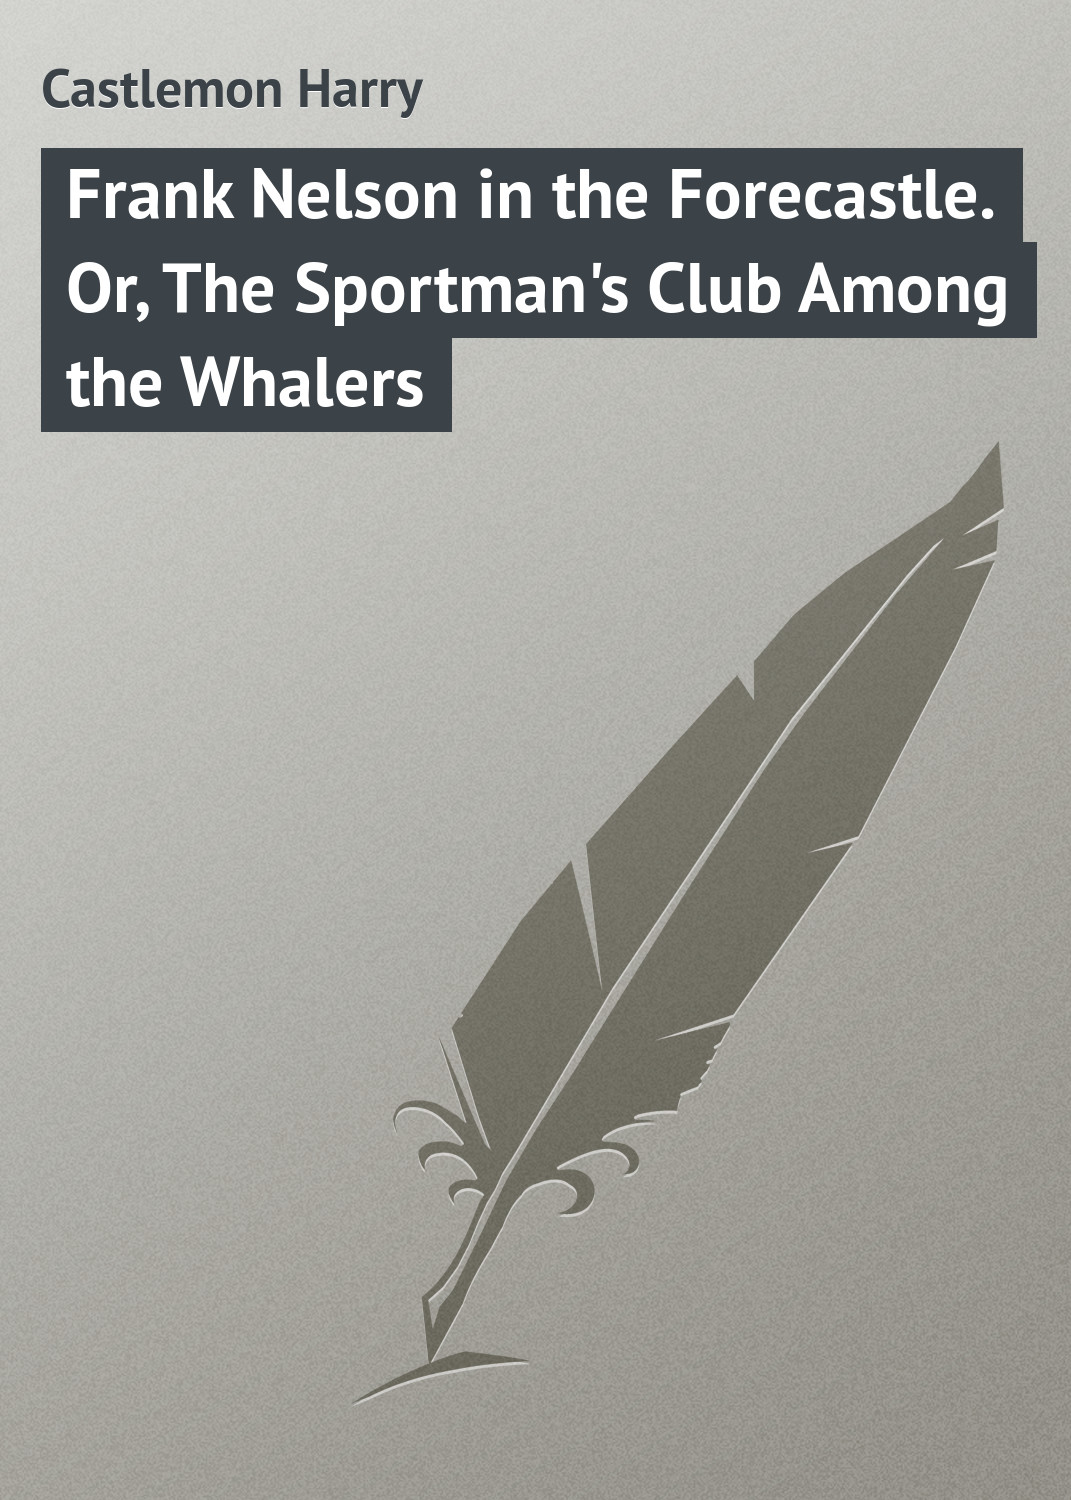 Frank Nelson in the Forecastle. Or, The Sportman's Club Among the Whalers